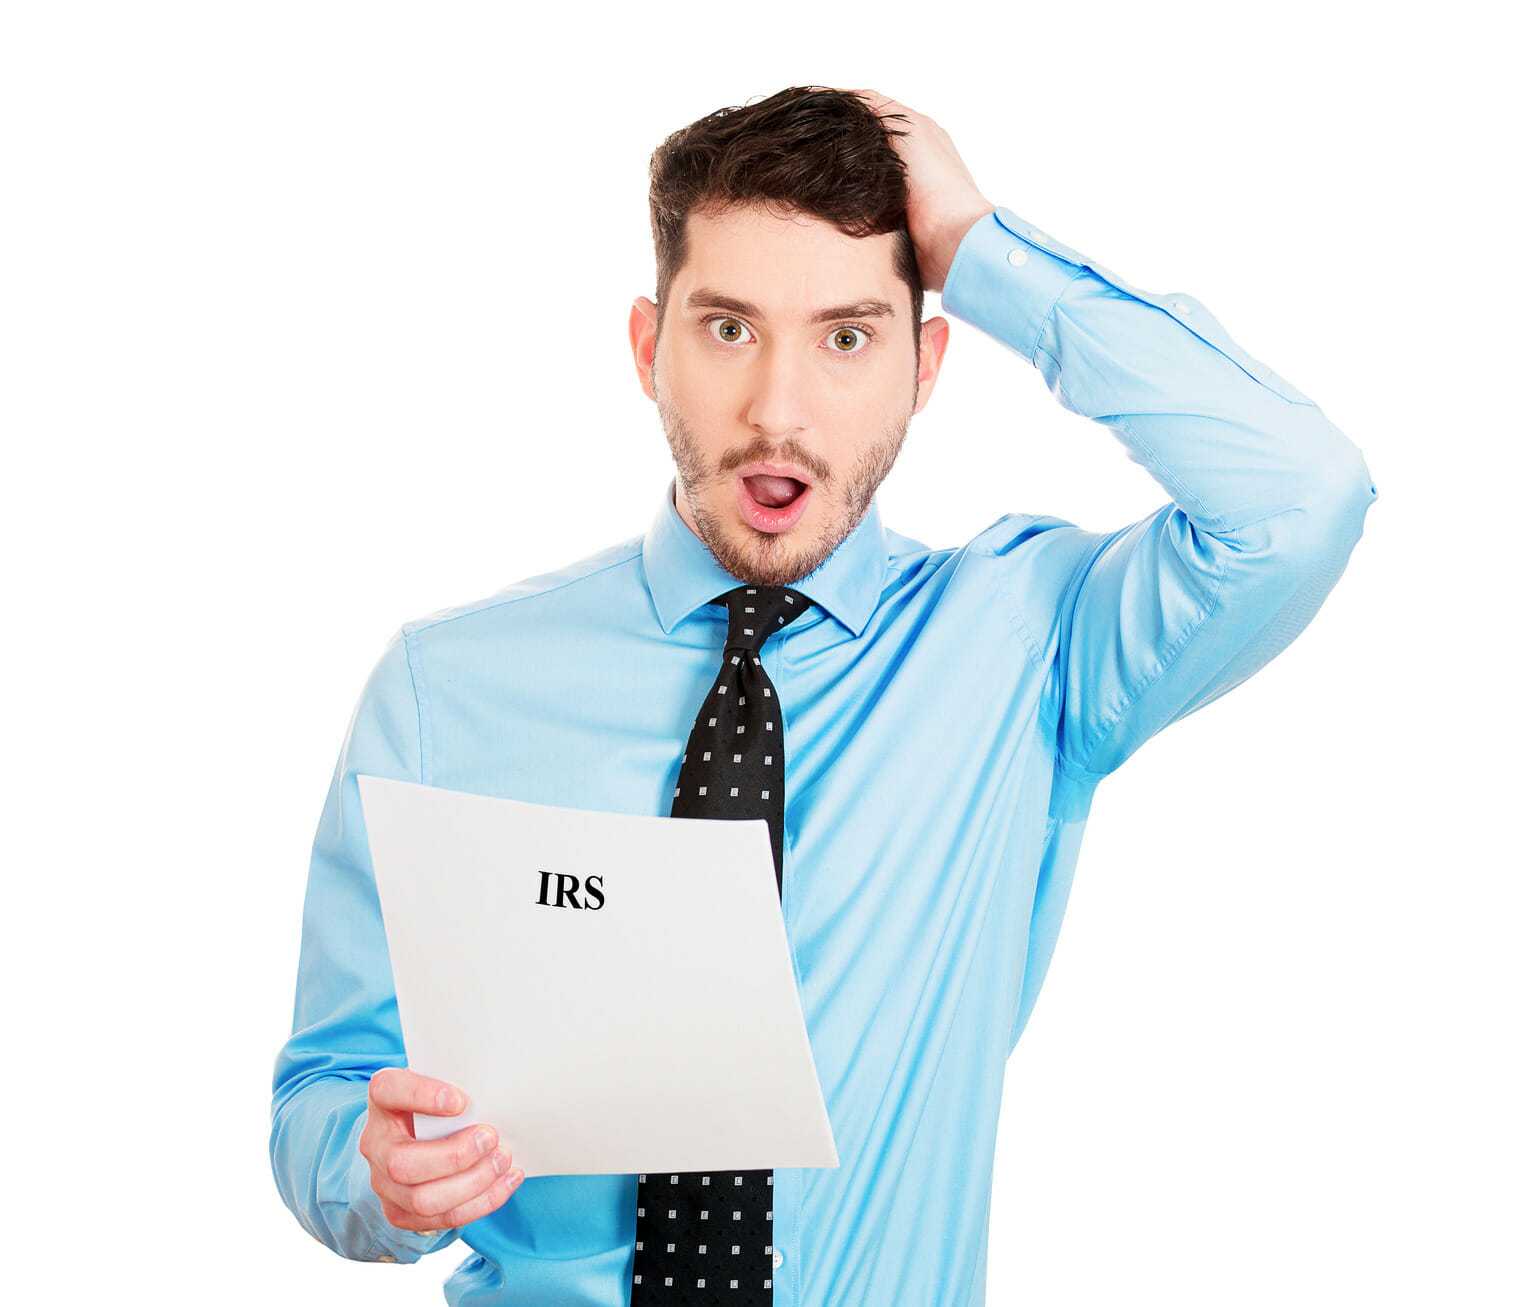 IRS Forms Can be daunting